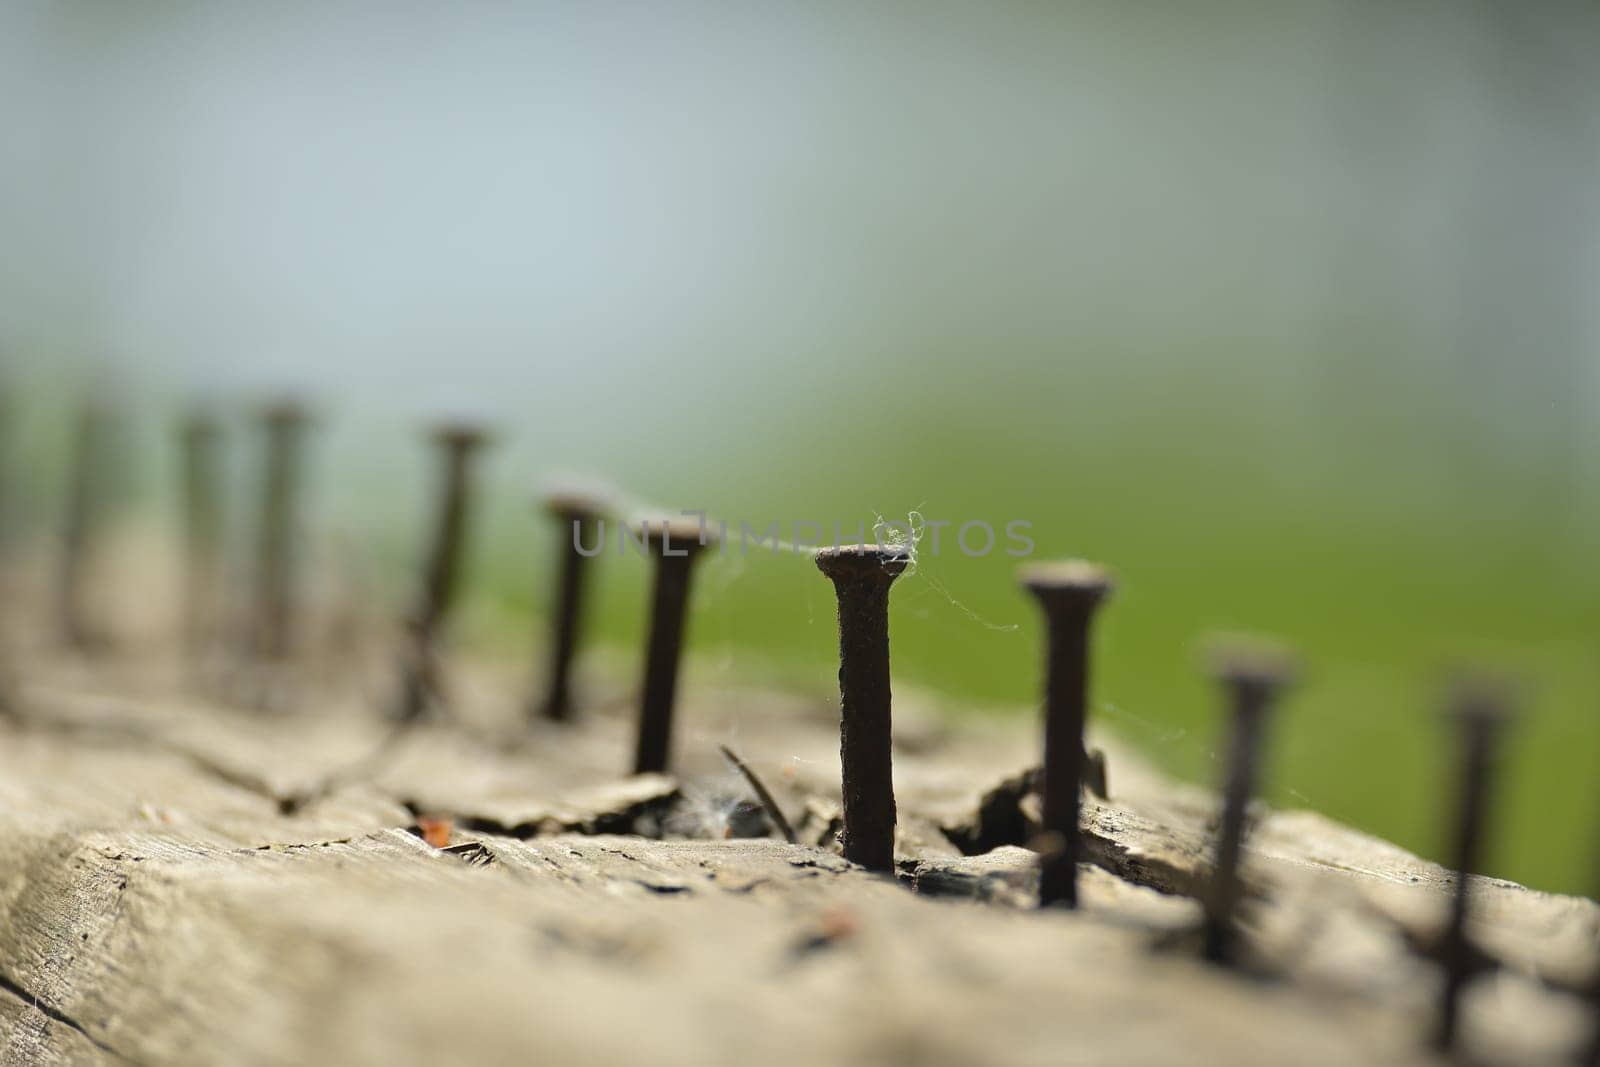 Old rusted nails halfway inserted into the wooden surface by NetPix